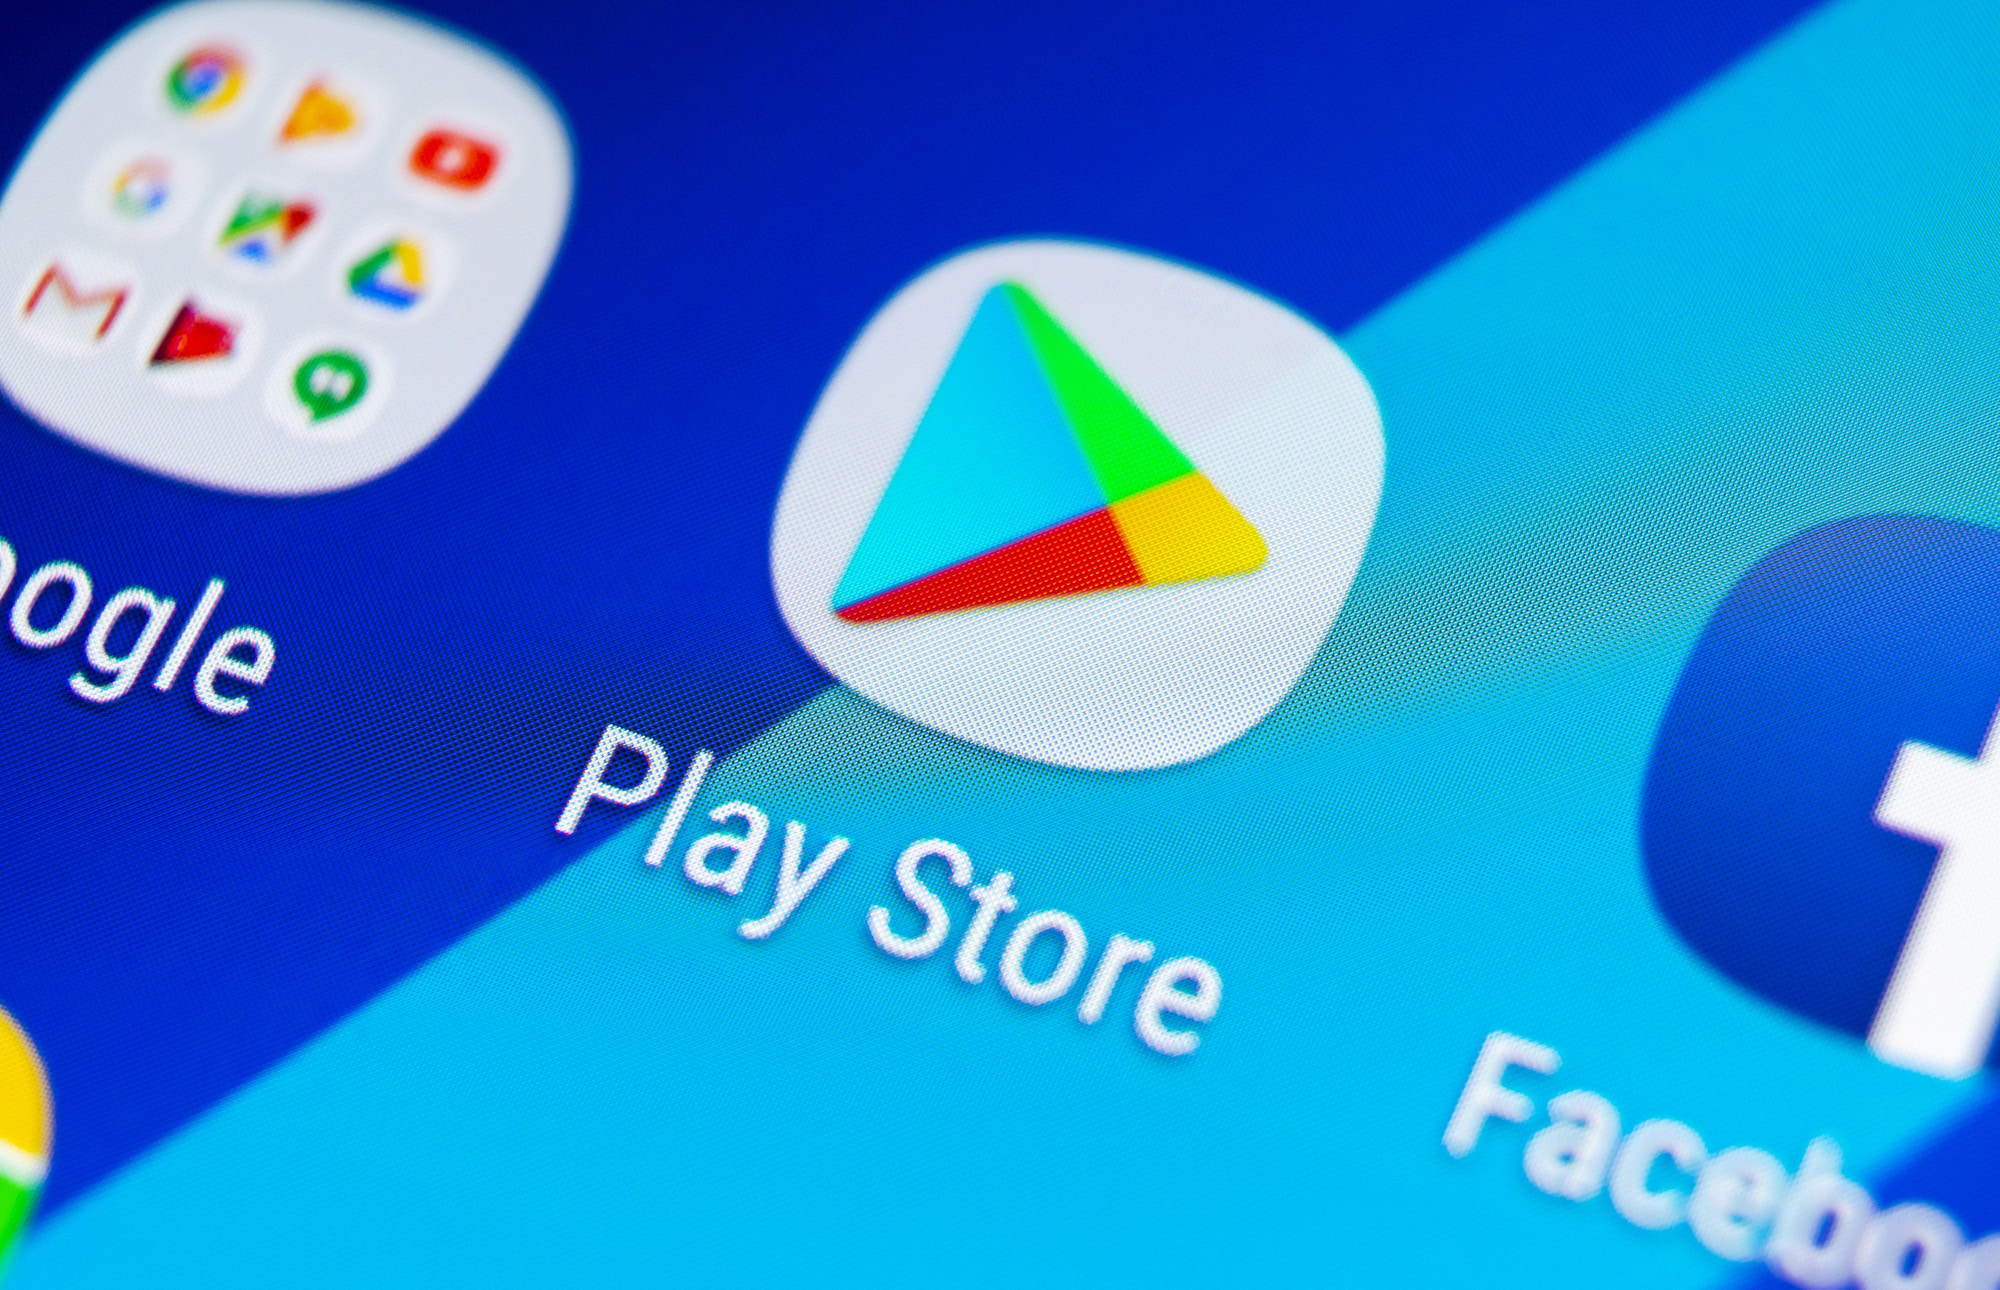 The Google Play Store celebrates its first 10 years with a new logo and an exclusive thumbnail promo